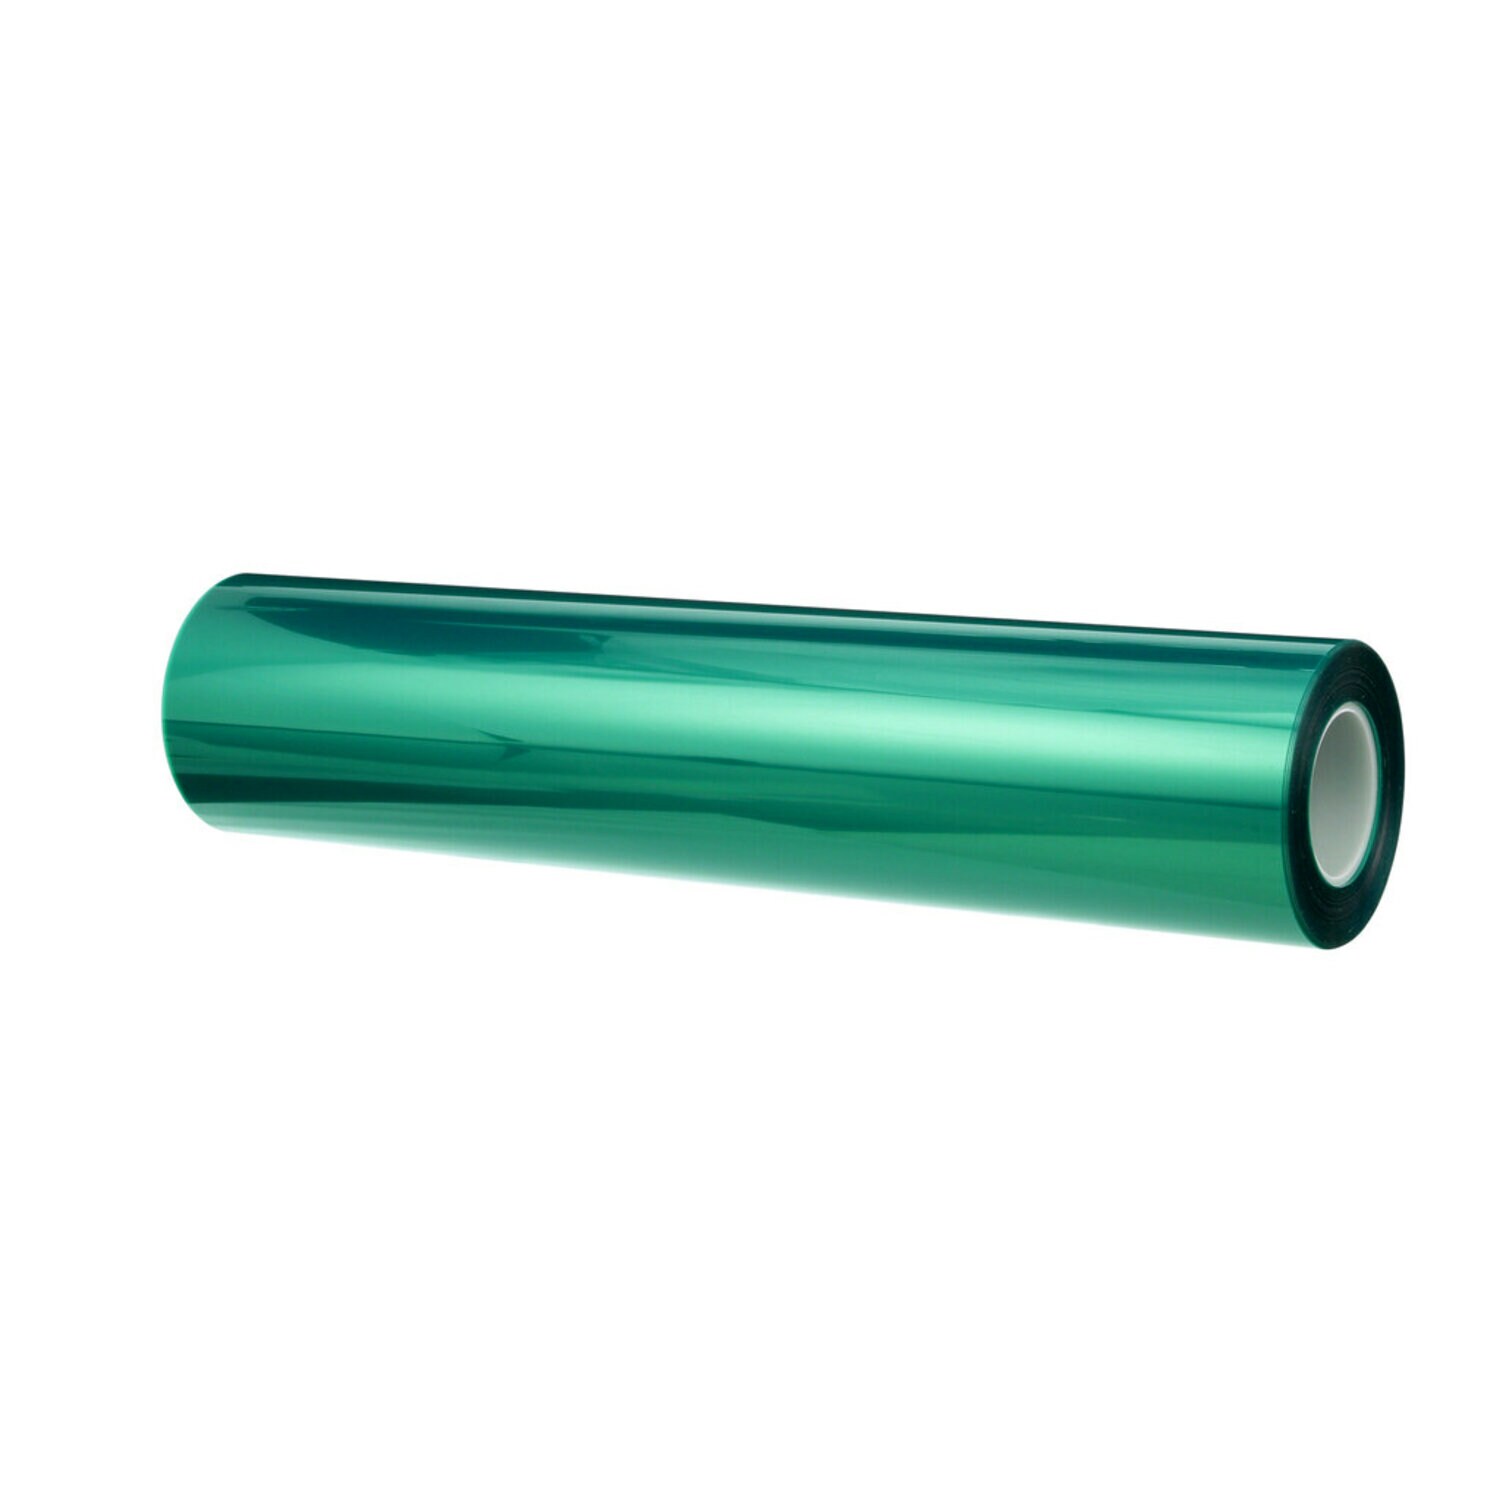 7000042809 - 3M Polyester Tape 8992L, Green, 50.4 in x 72 yd, 3.2 mil, 1 roll per
case